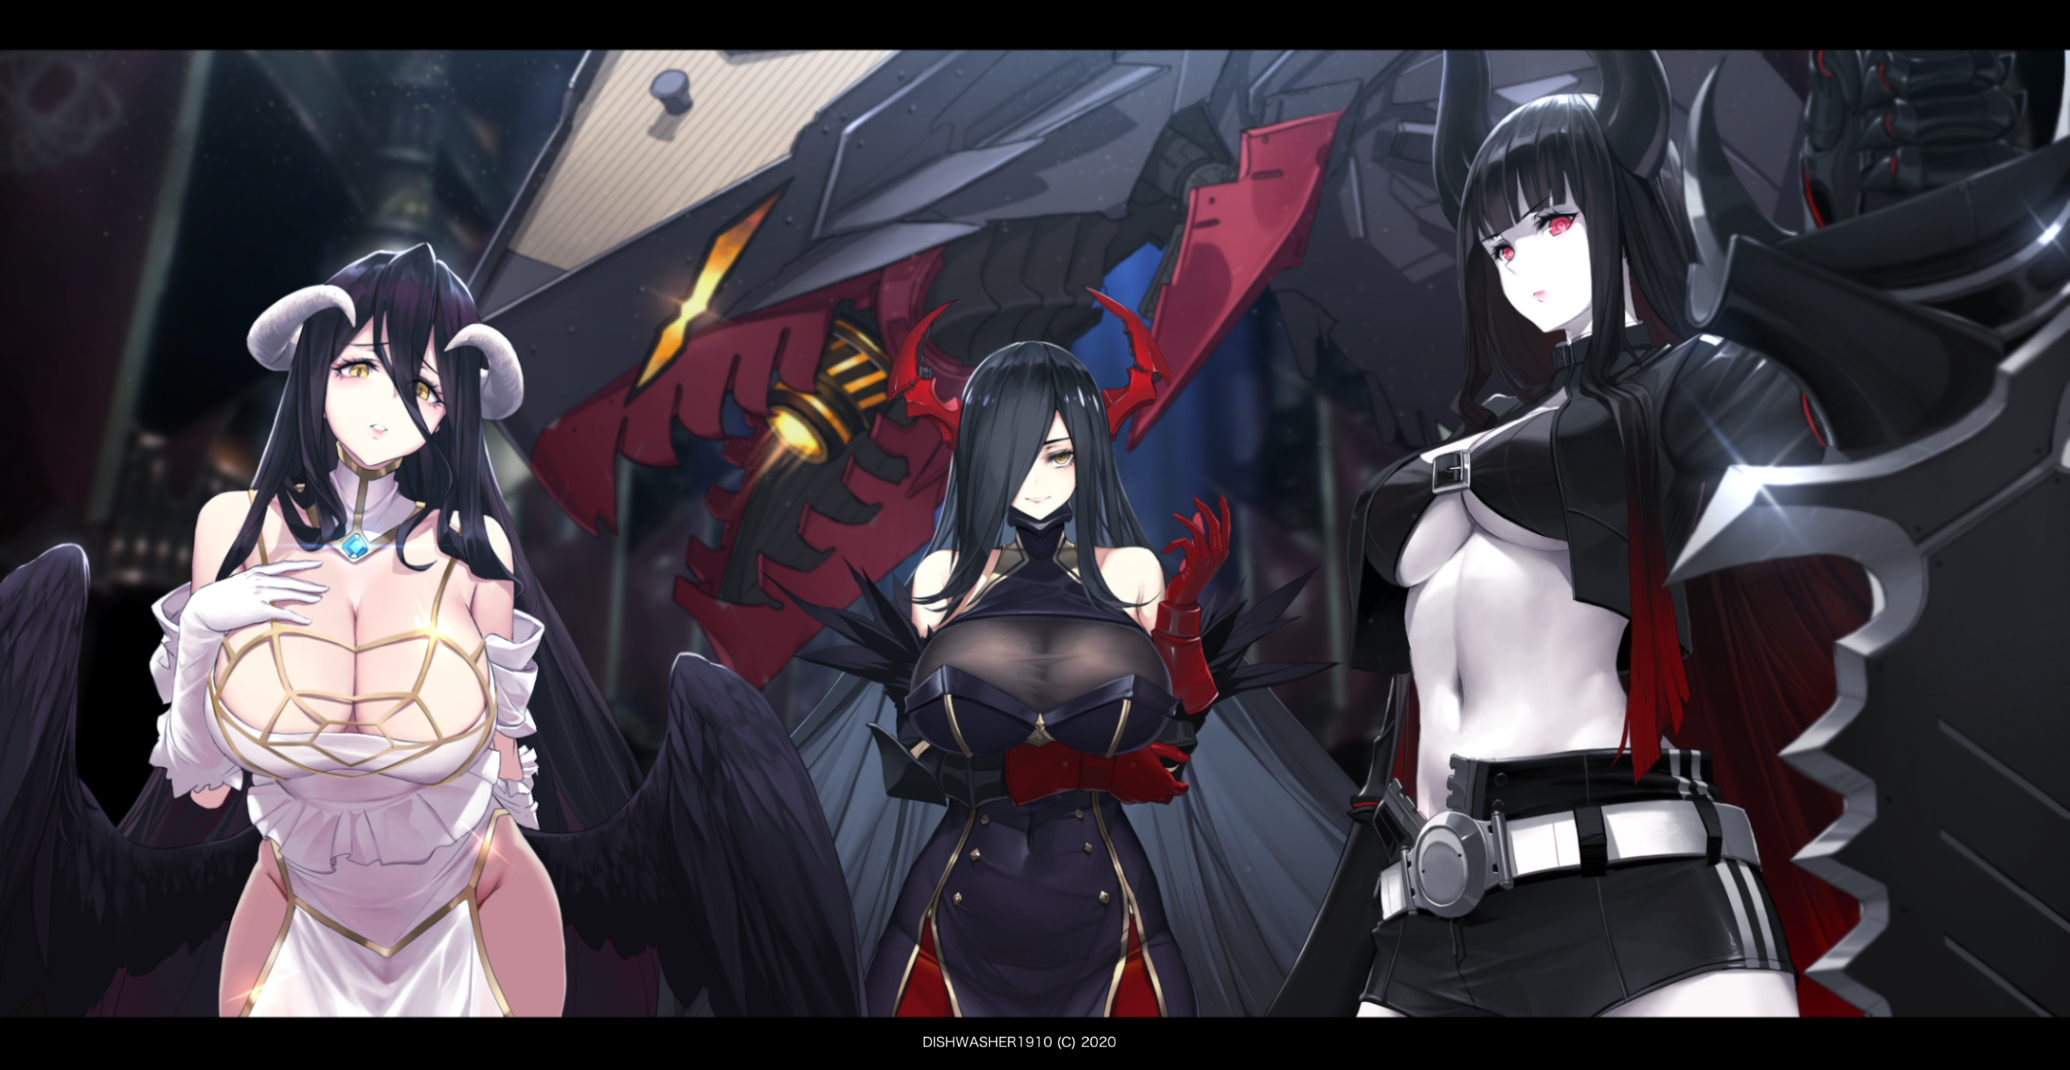 Anime 2070x1070 anime anime girls Dishwasher1910 cleavage Azur Lane horns Overlord (anime) Black Rock Shooter crossover Albedo (OverLord) Friedrich der Grosse Black Gold Saw huge breasts